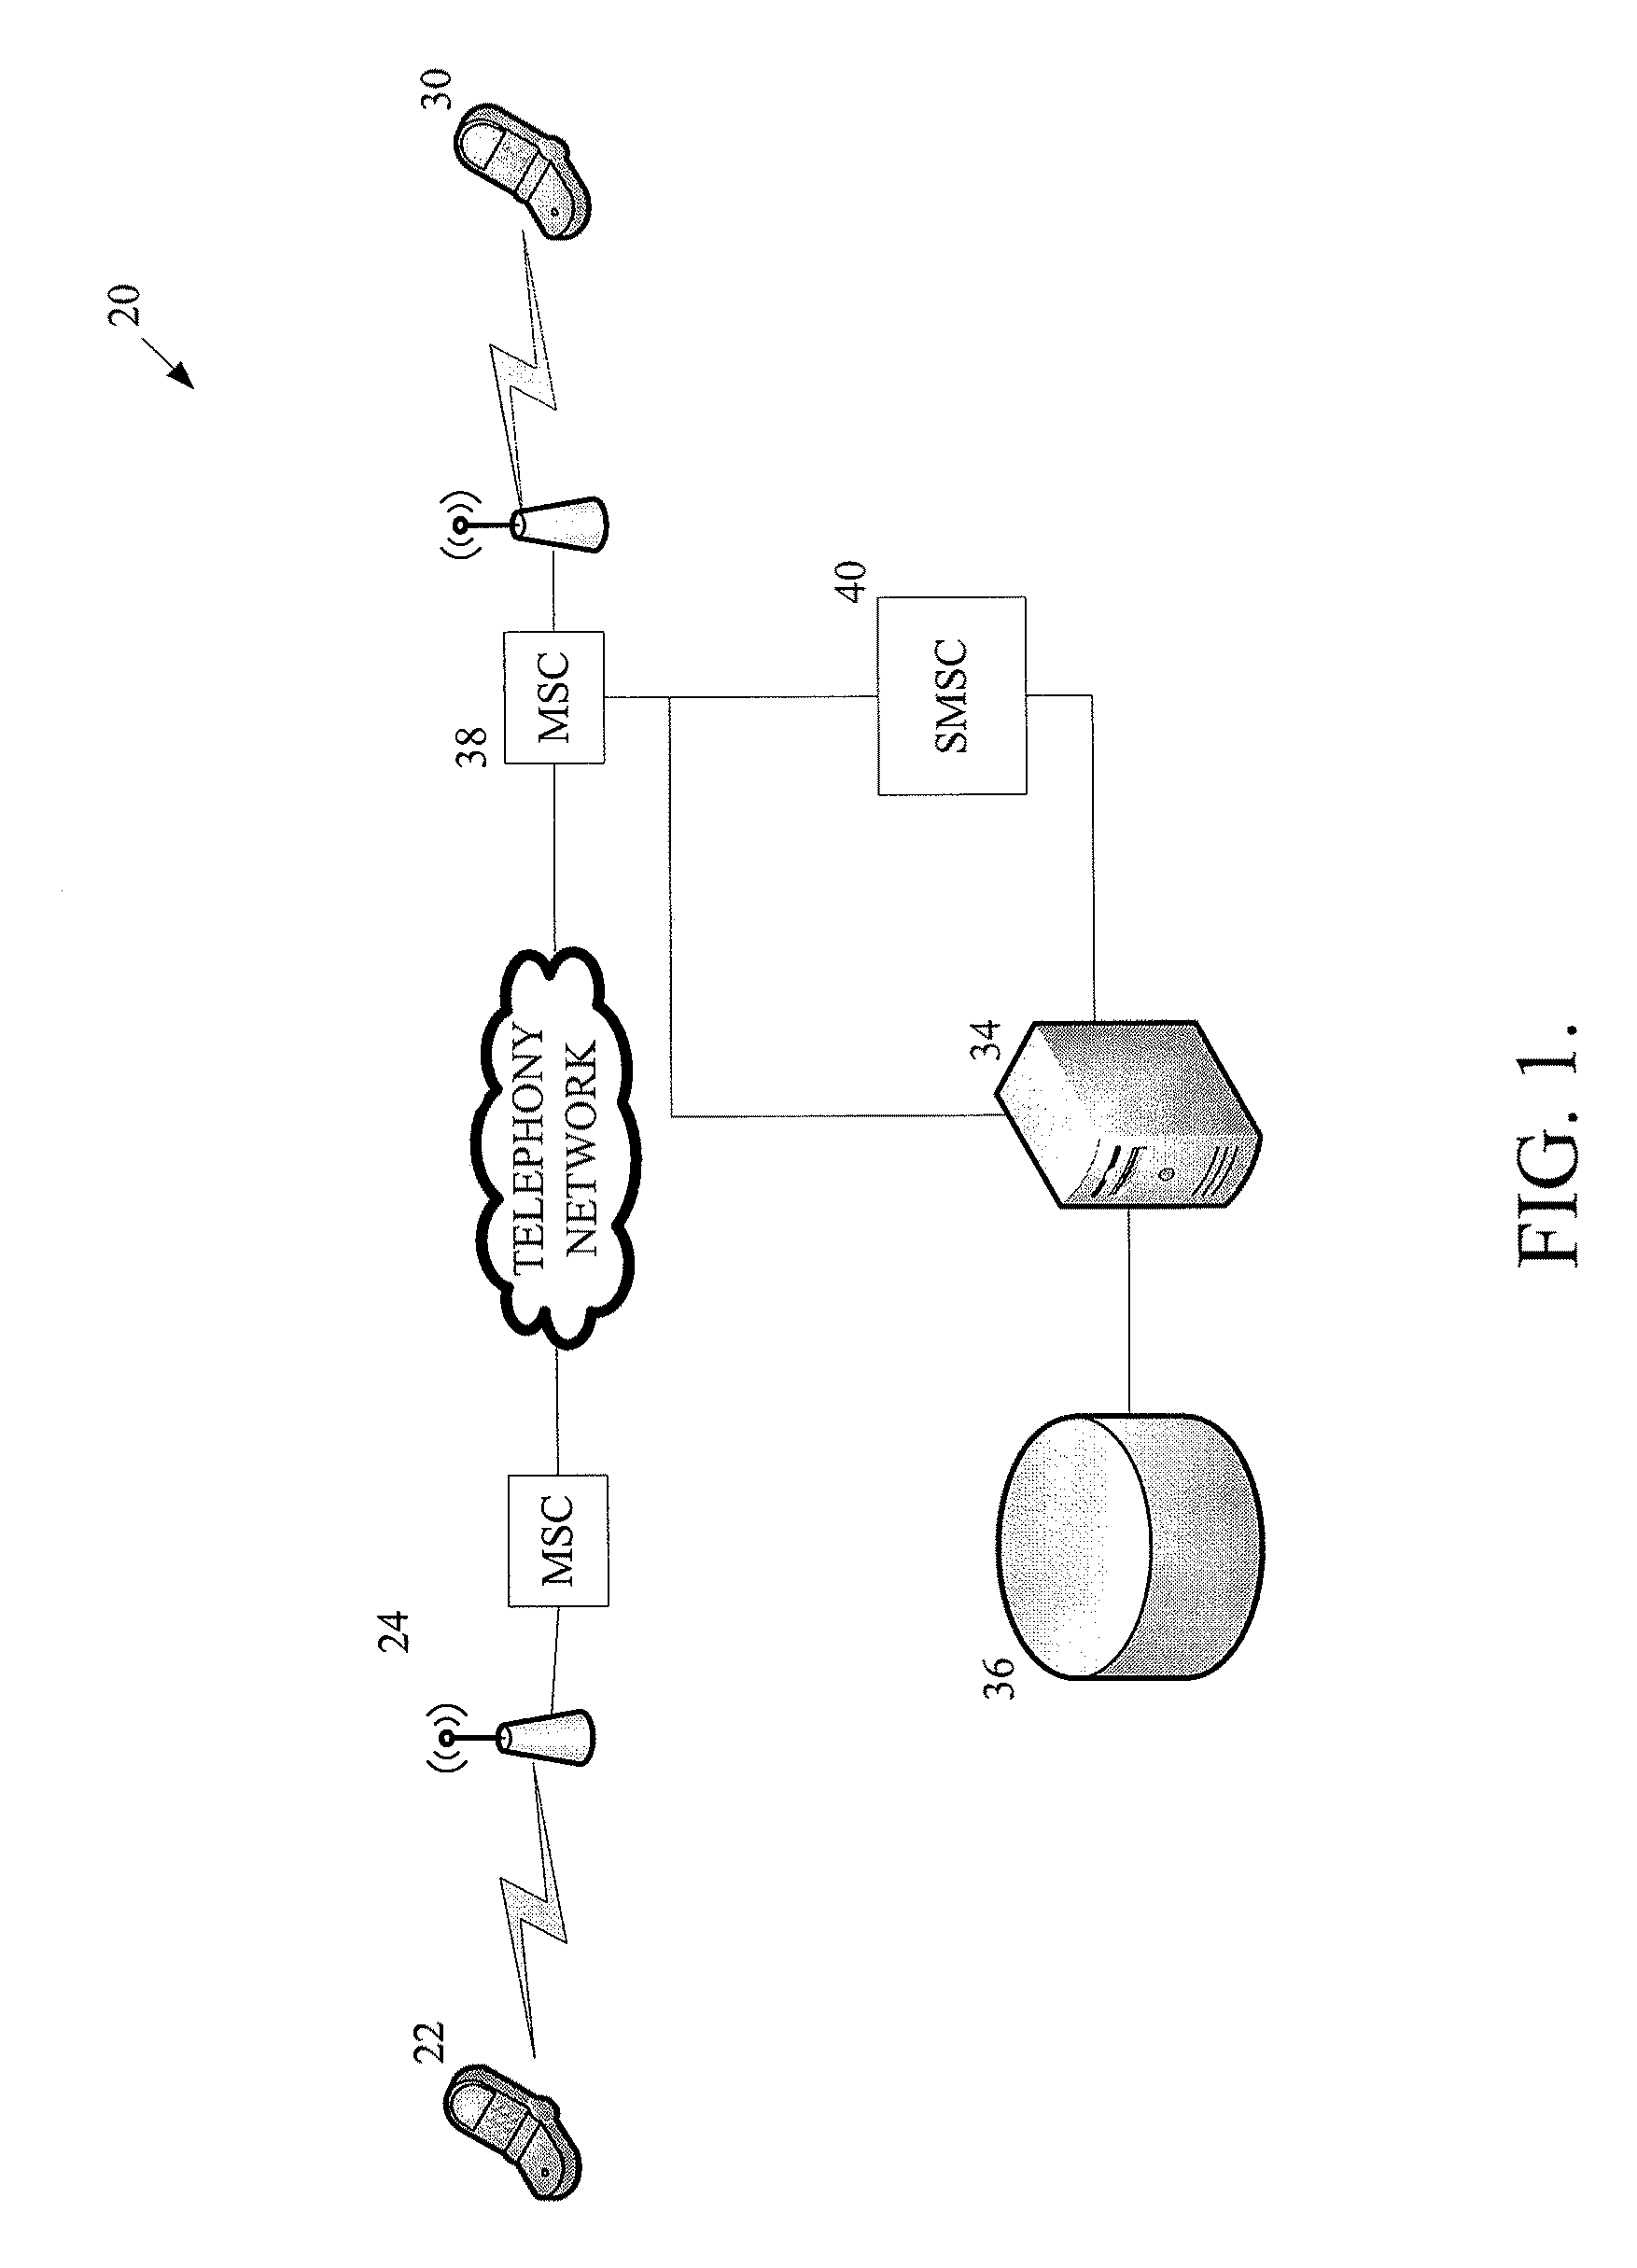 System and method for determination of network and conditional execution of applications and promotions